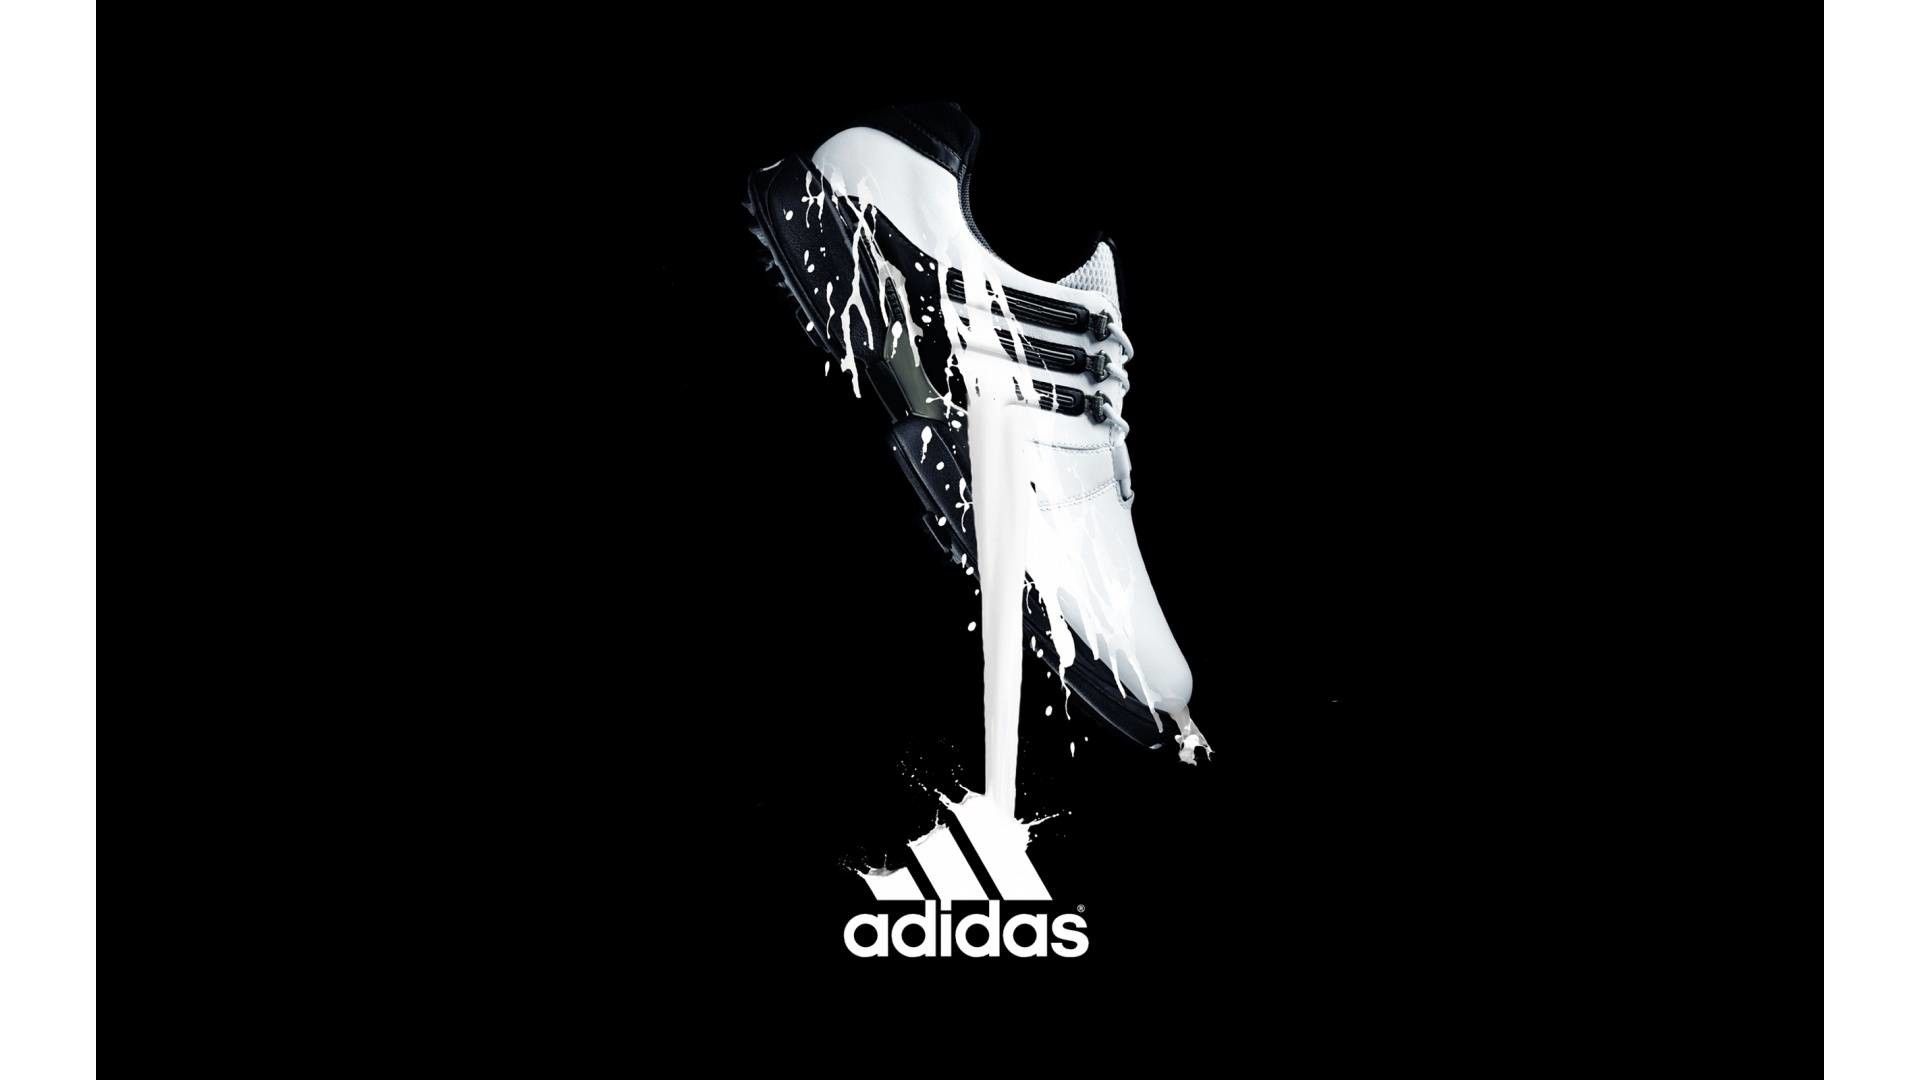 his heaven chop Adidas Soccer Girl Quotes Wallpapers on WallpaperDog